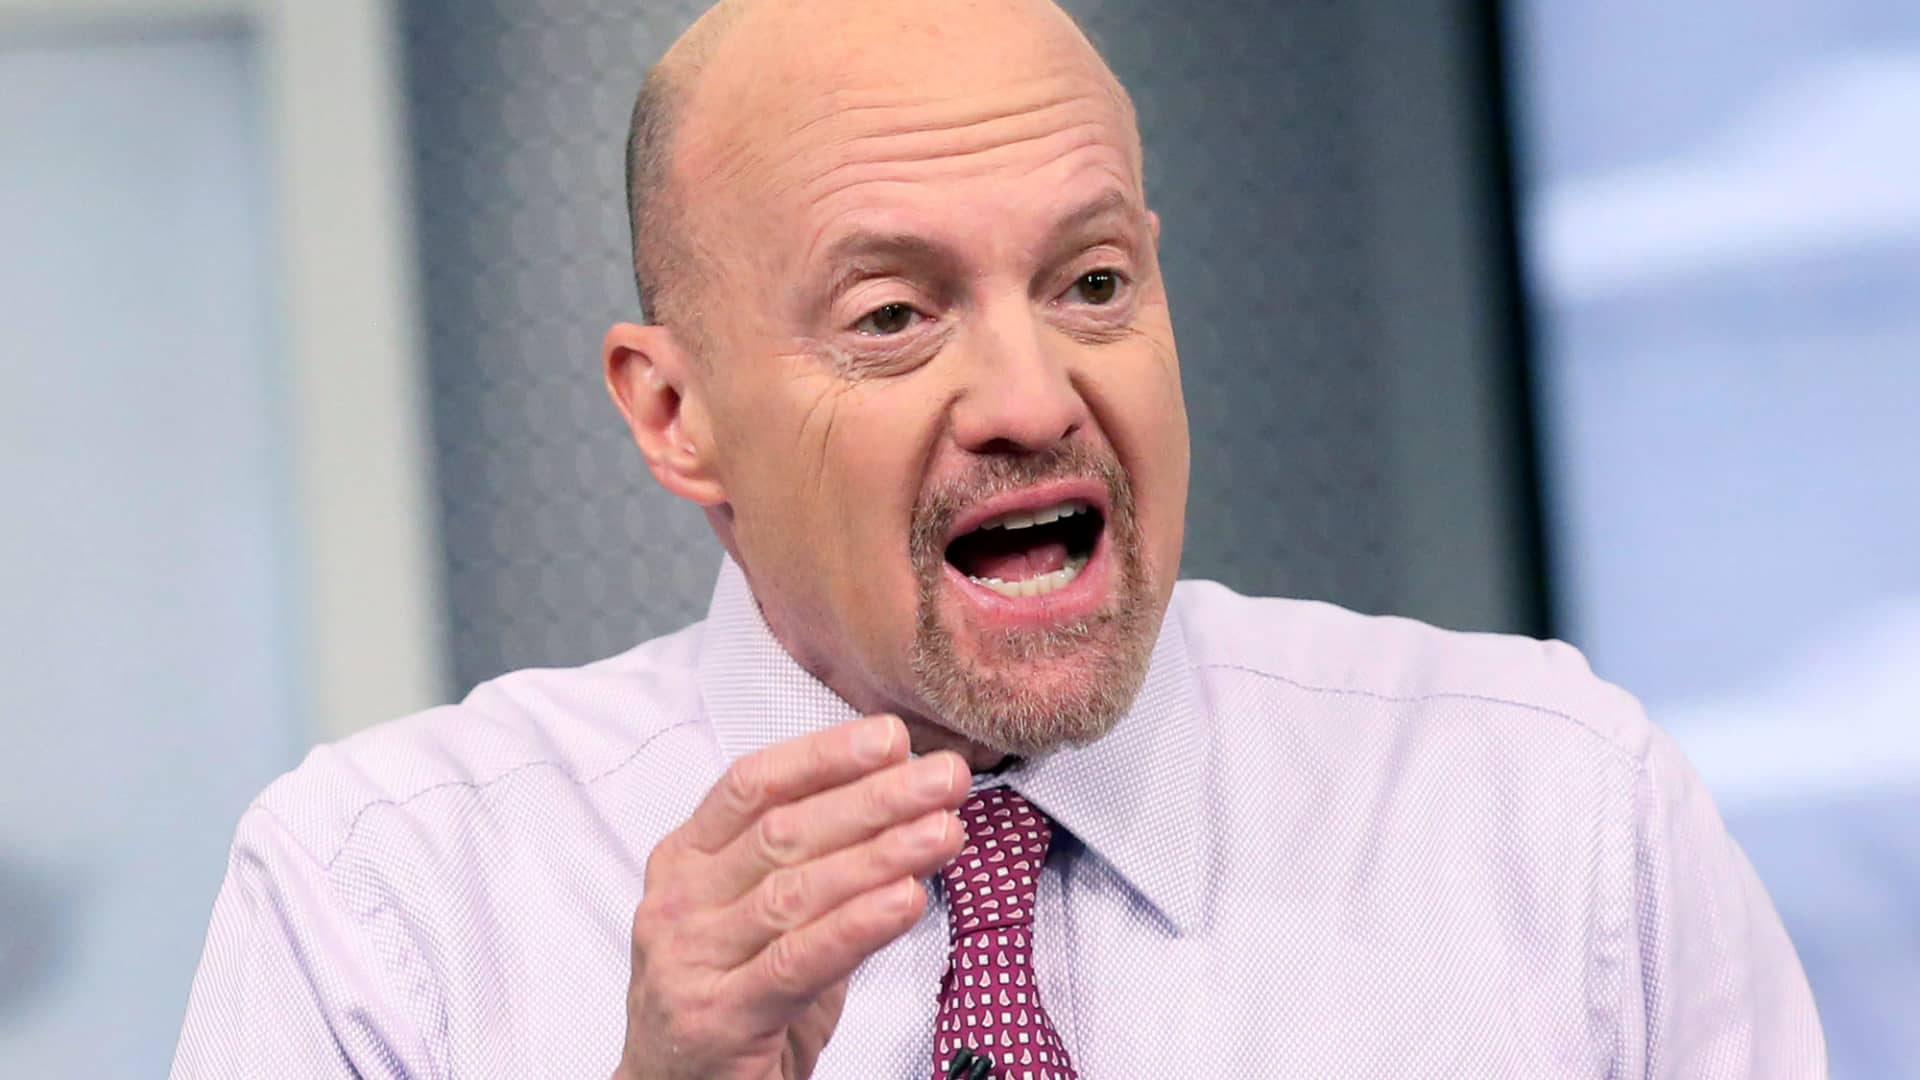 Charts suggest inflation could soon come down ‘substantially,’ Jim Cramer says - CNBC